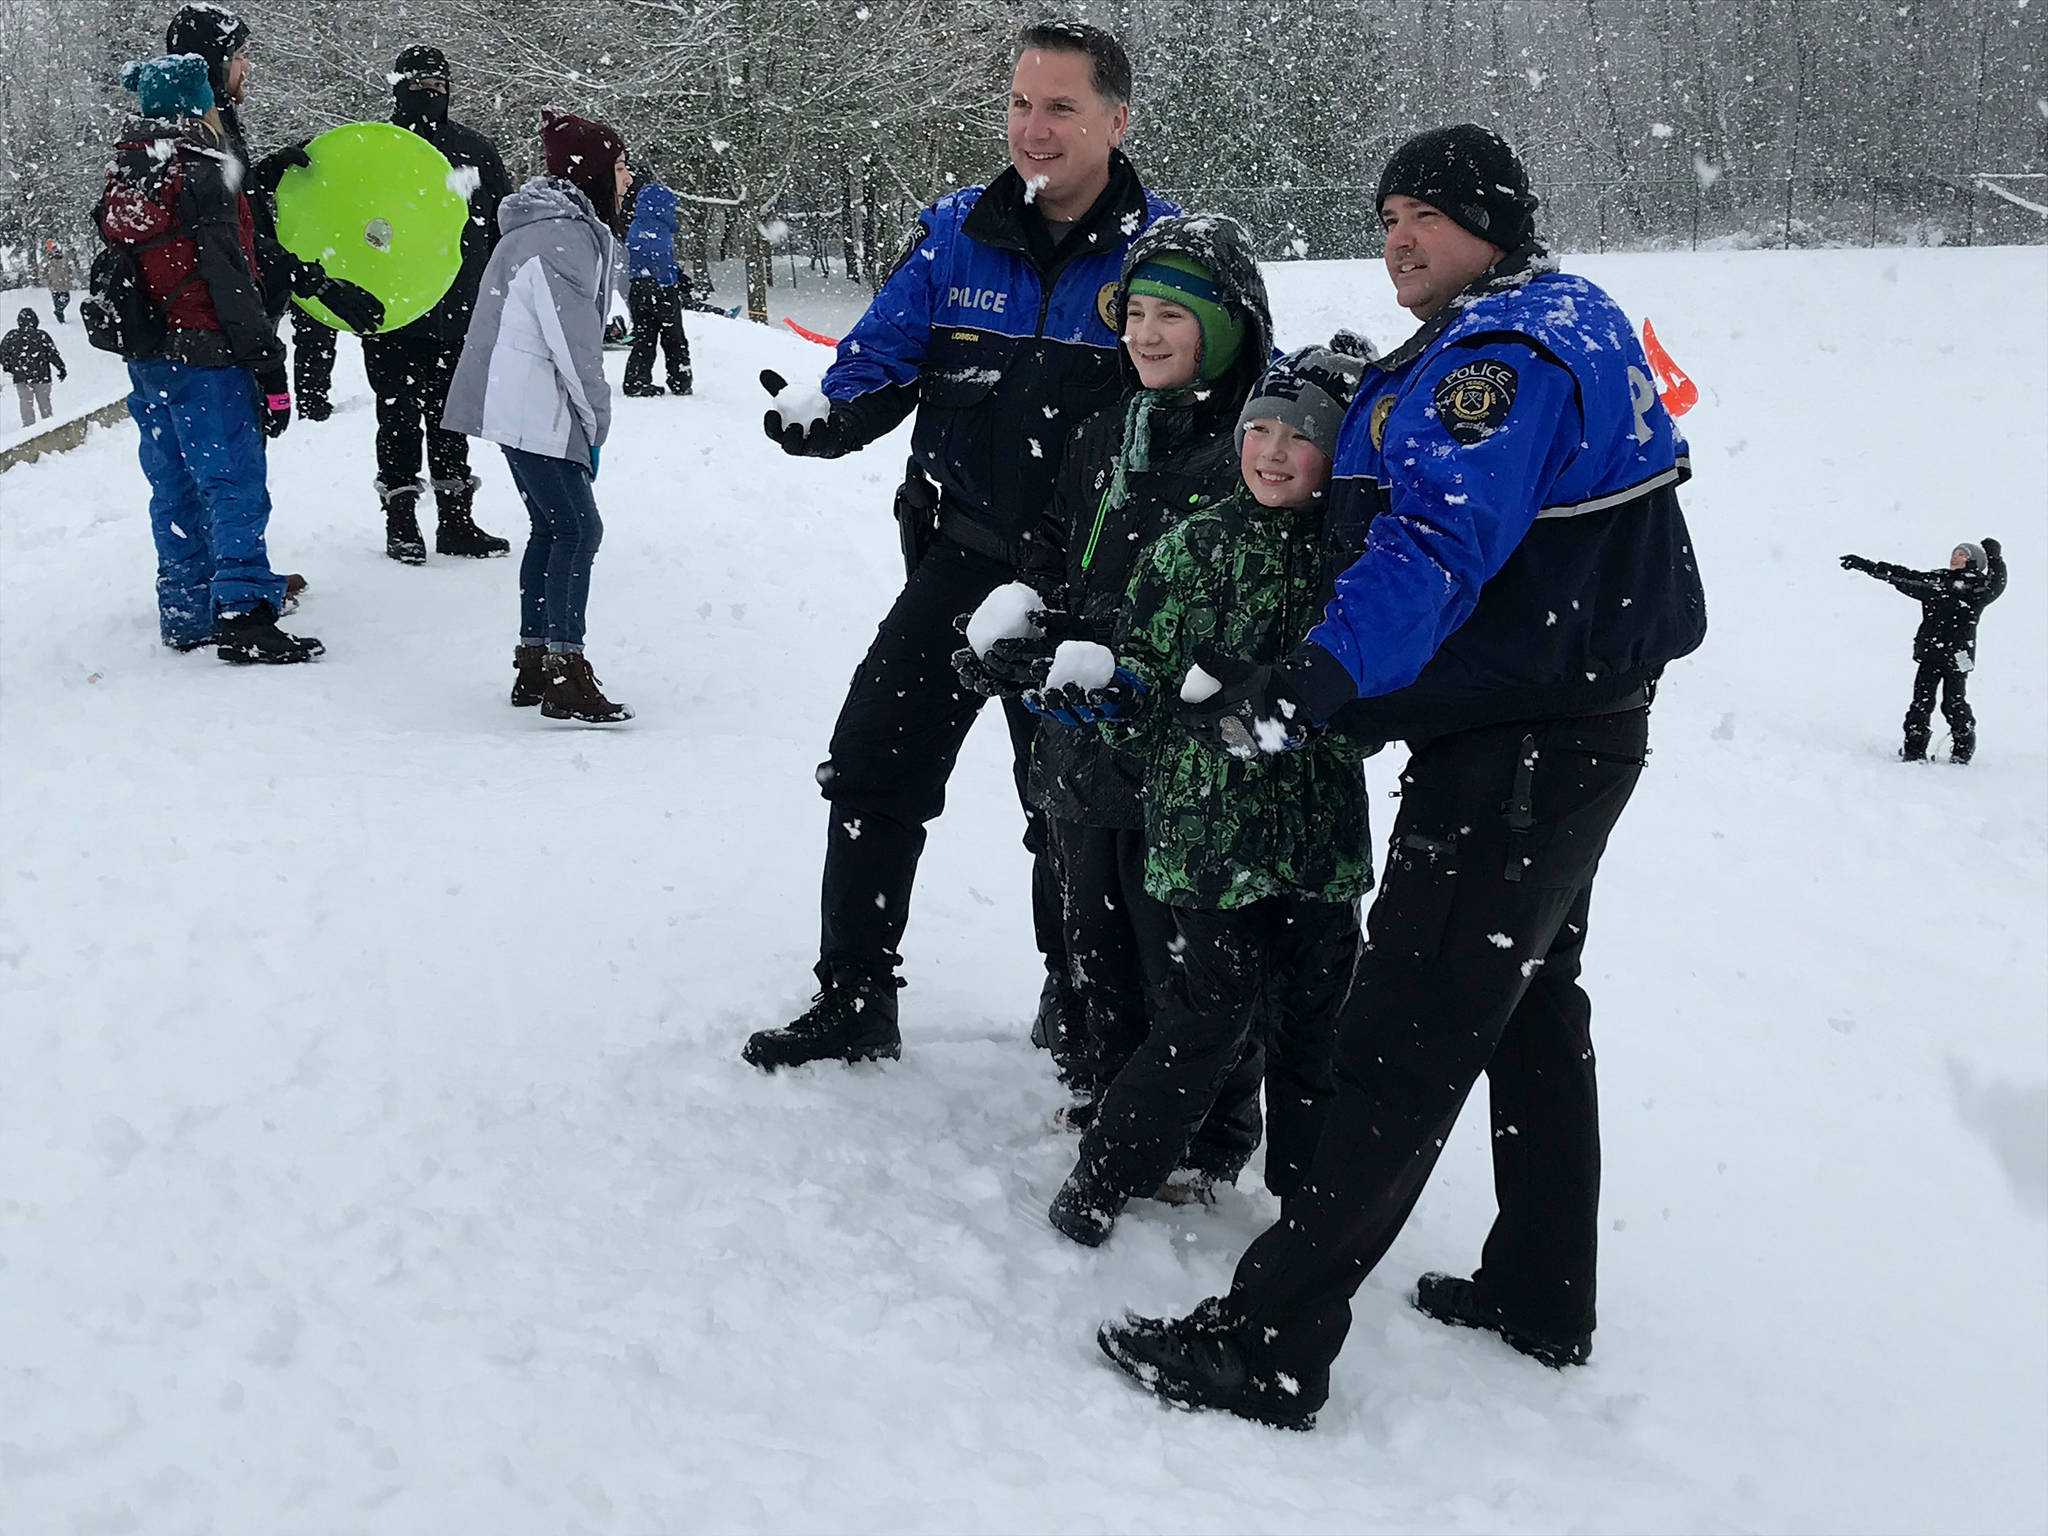 Kids and adults brought their sleds to Celebration Park and mingled with Federal Way police as the snow drifted down Monday afternoon. Photo by Andy Hobbs/the Mirror